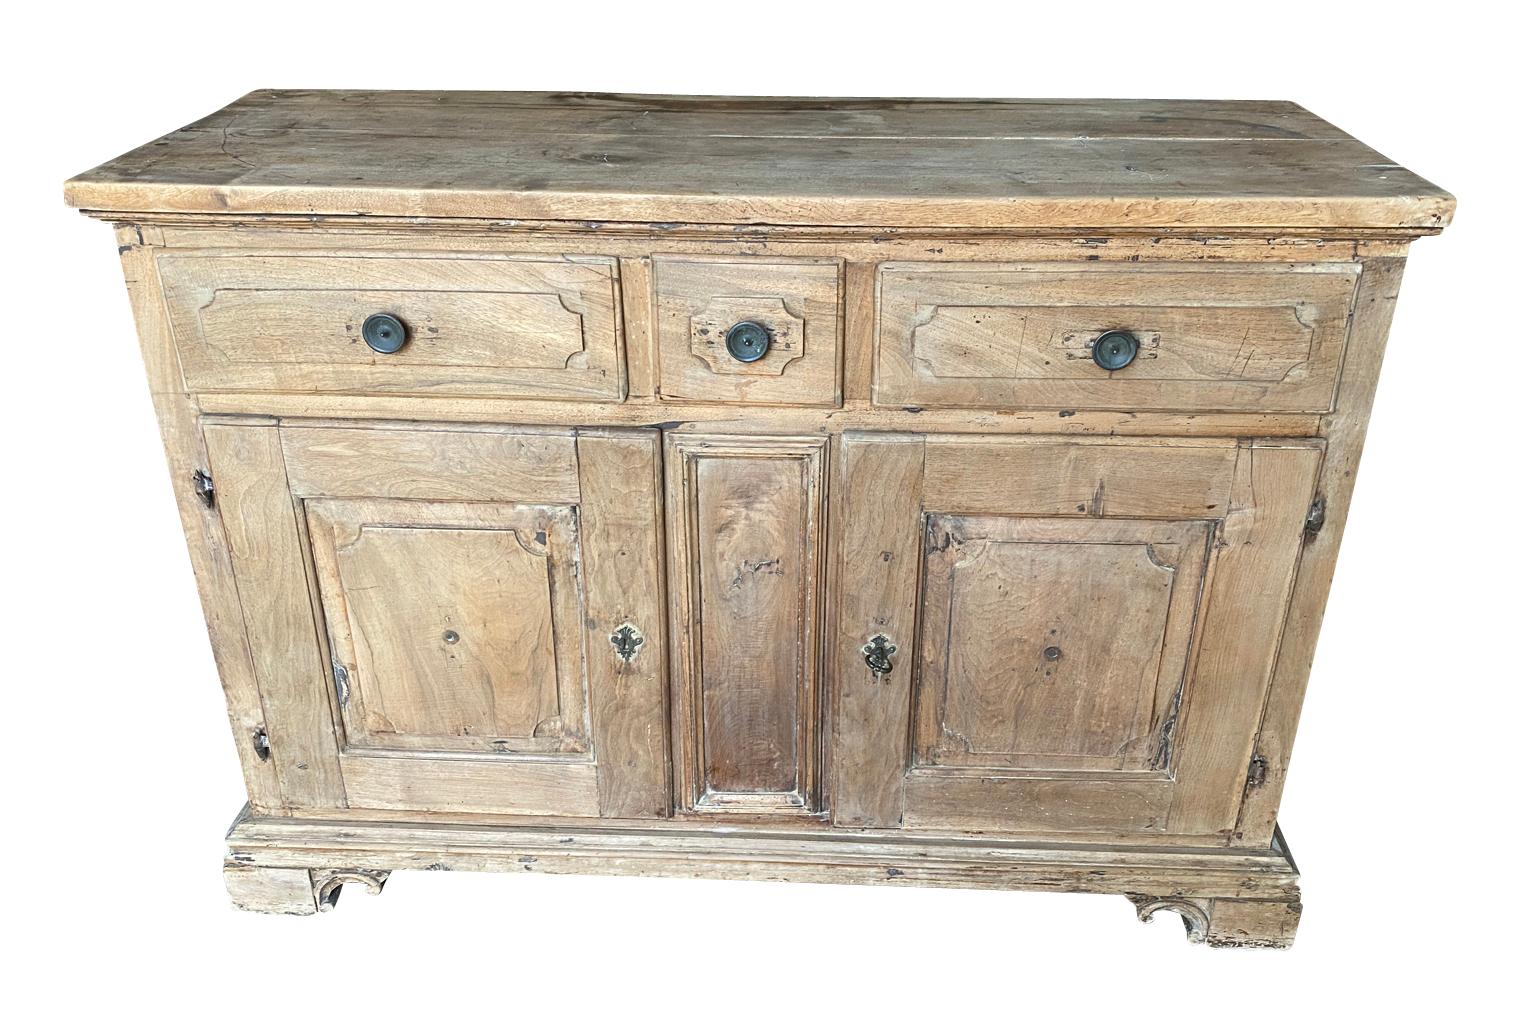 A very handsome early 19th century Credenza from the Genoa region of Italy.  Beautifully constructed from walnut with 3 drawers over double doors, interior shelving raised on bracket feet.  Wonderful patina.